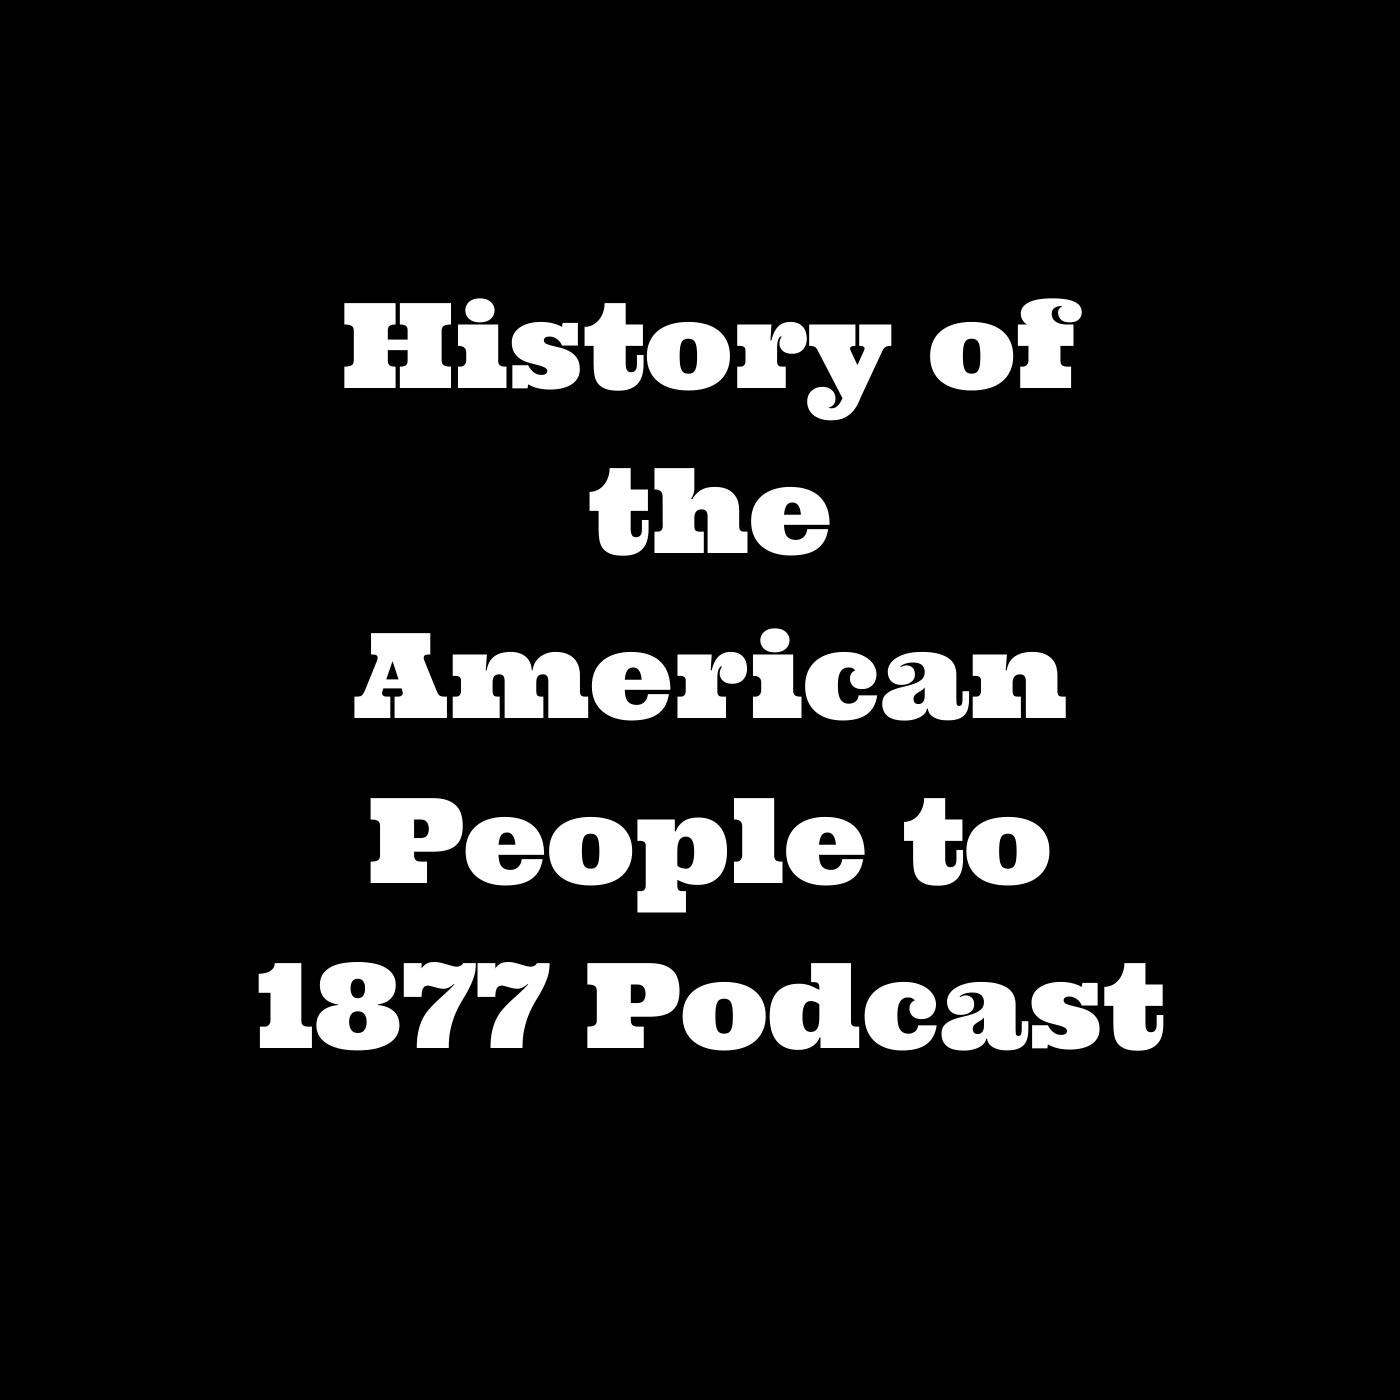 History of the American People to 1877